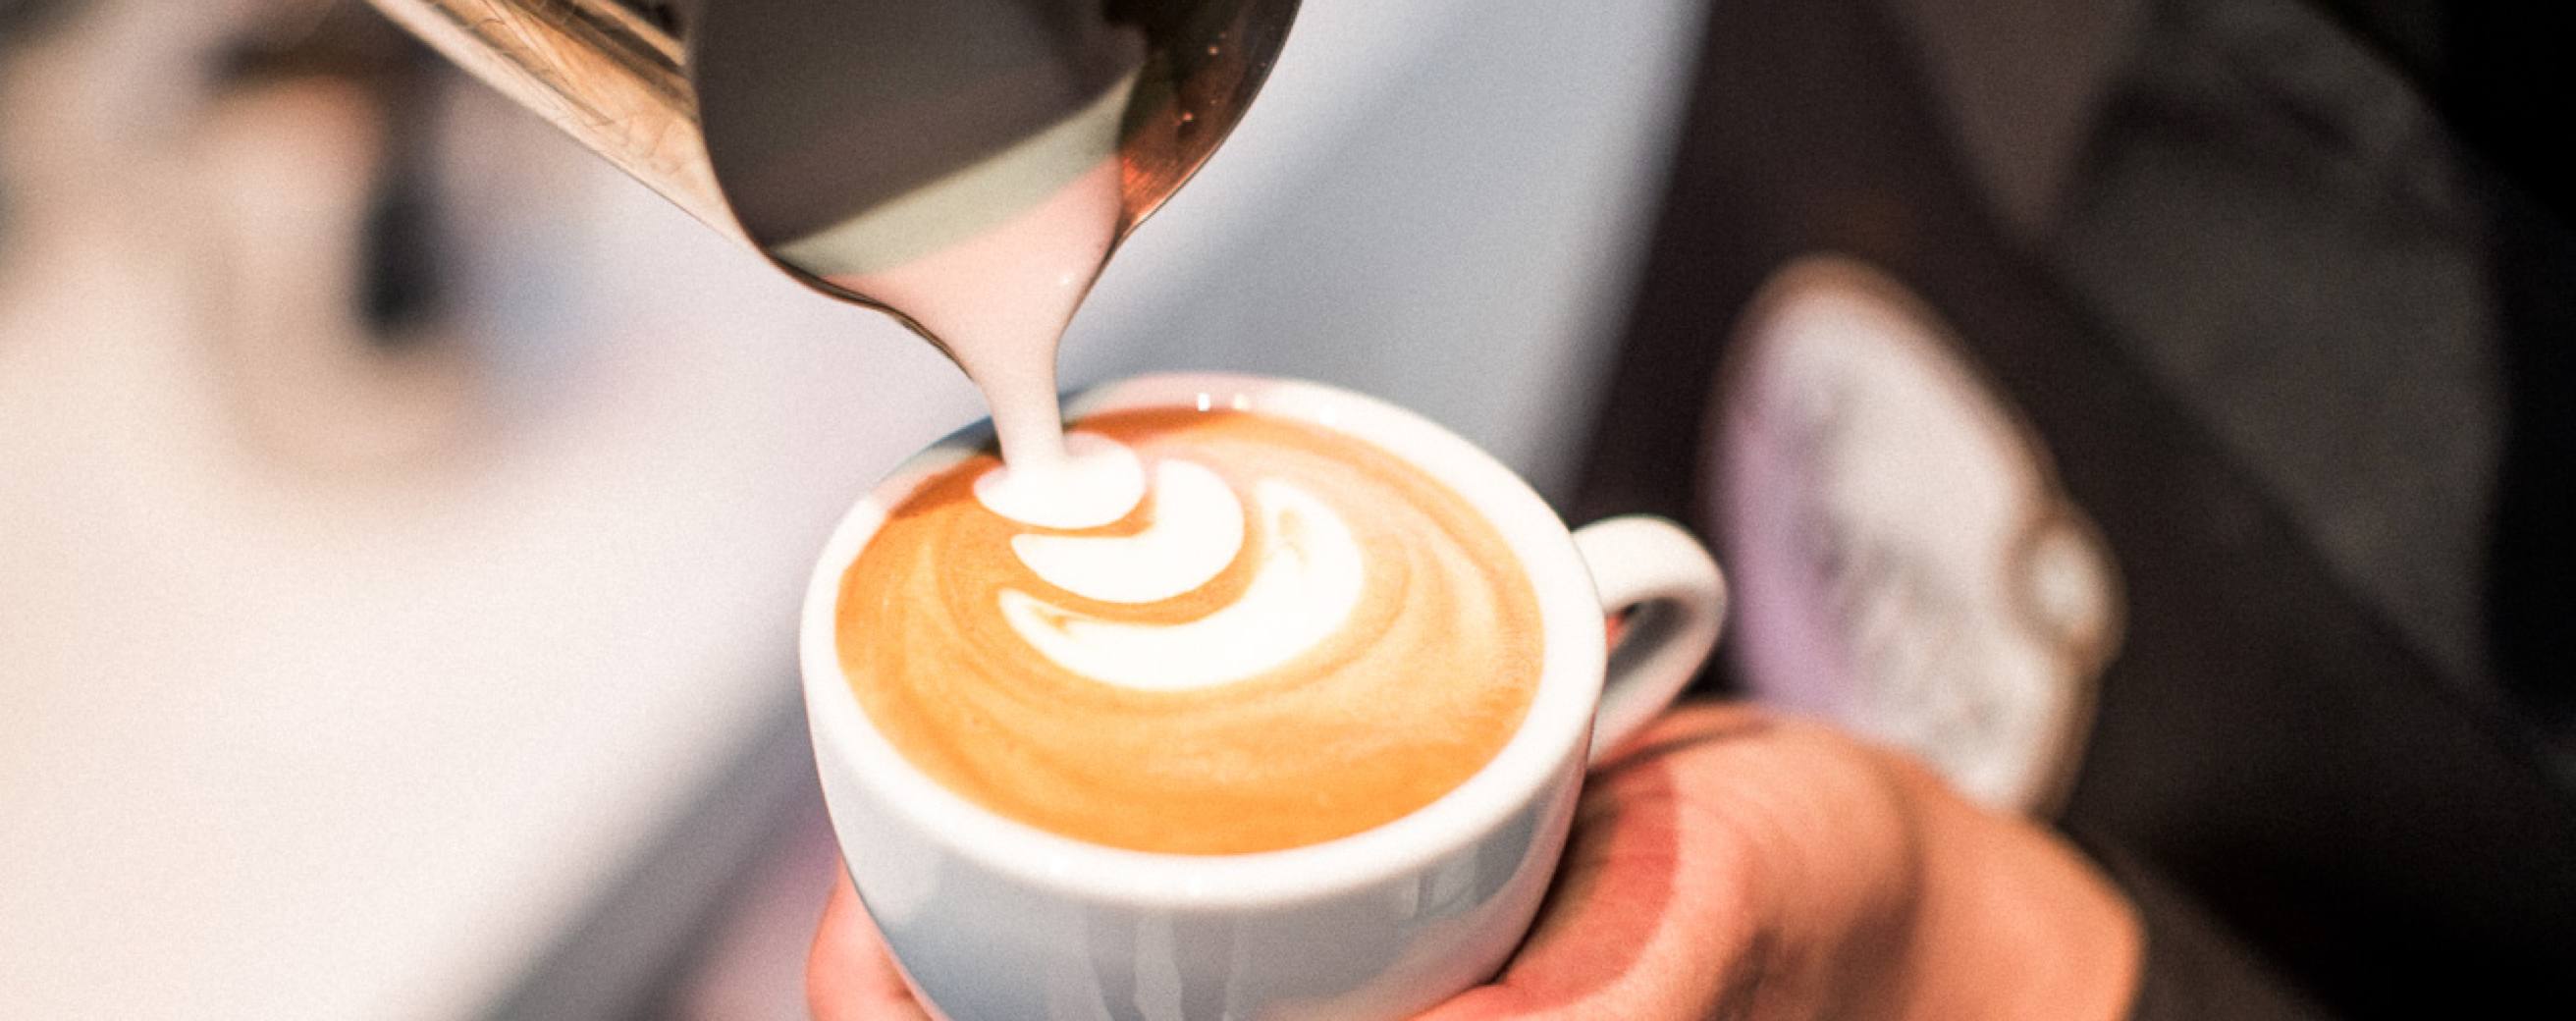 Learn how to make the perfect cappuccino with the smart milk